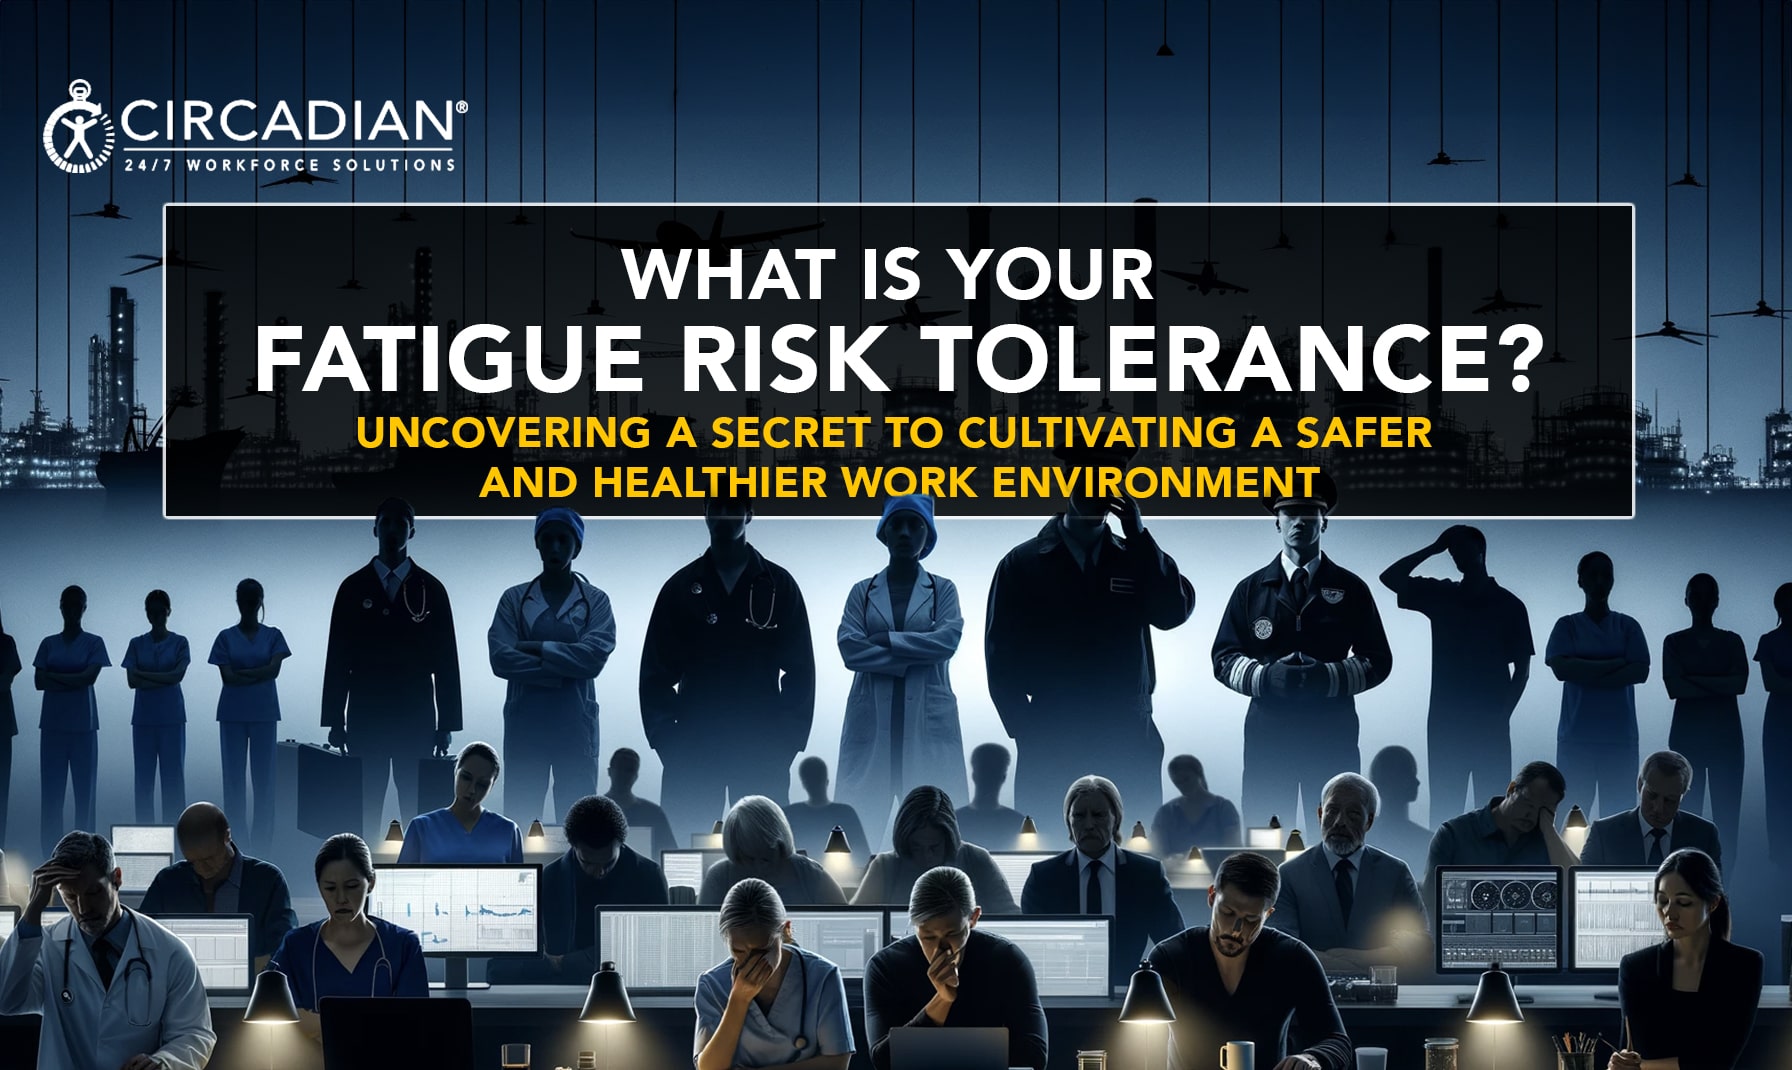 What Is Your Fatigue Risk Tolerance? Uncovering a Secret to Cultivating a Safer and Healthier Work Environment